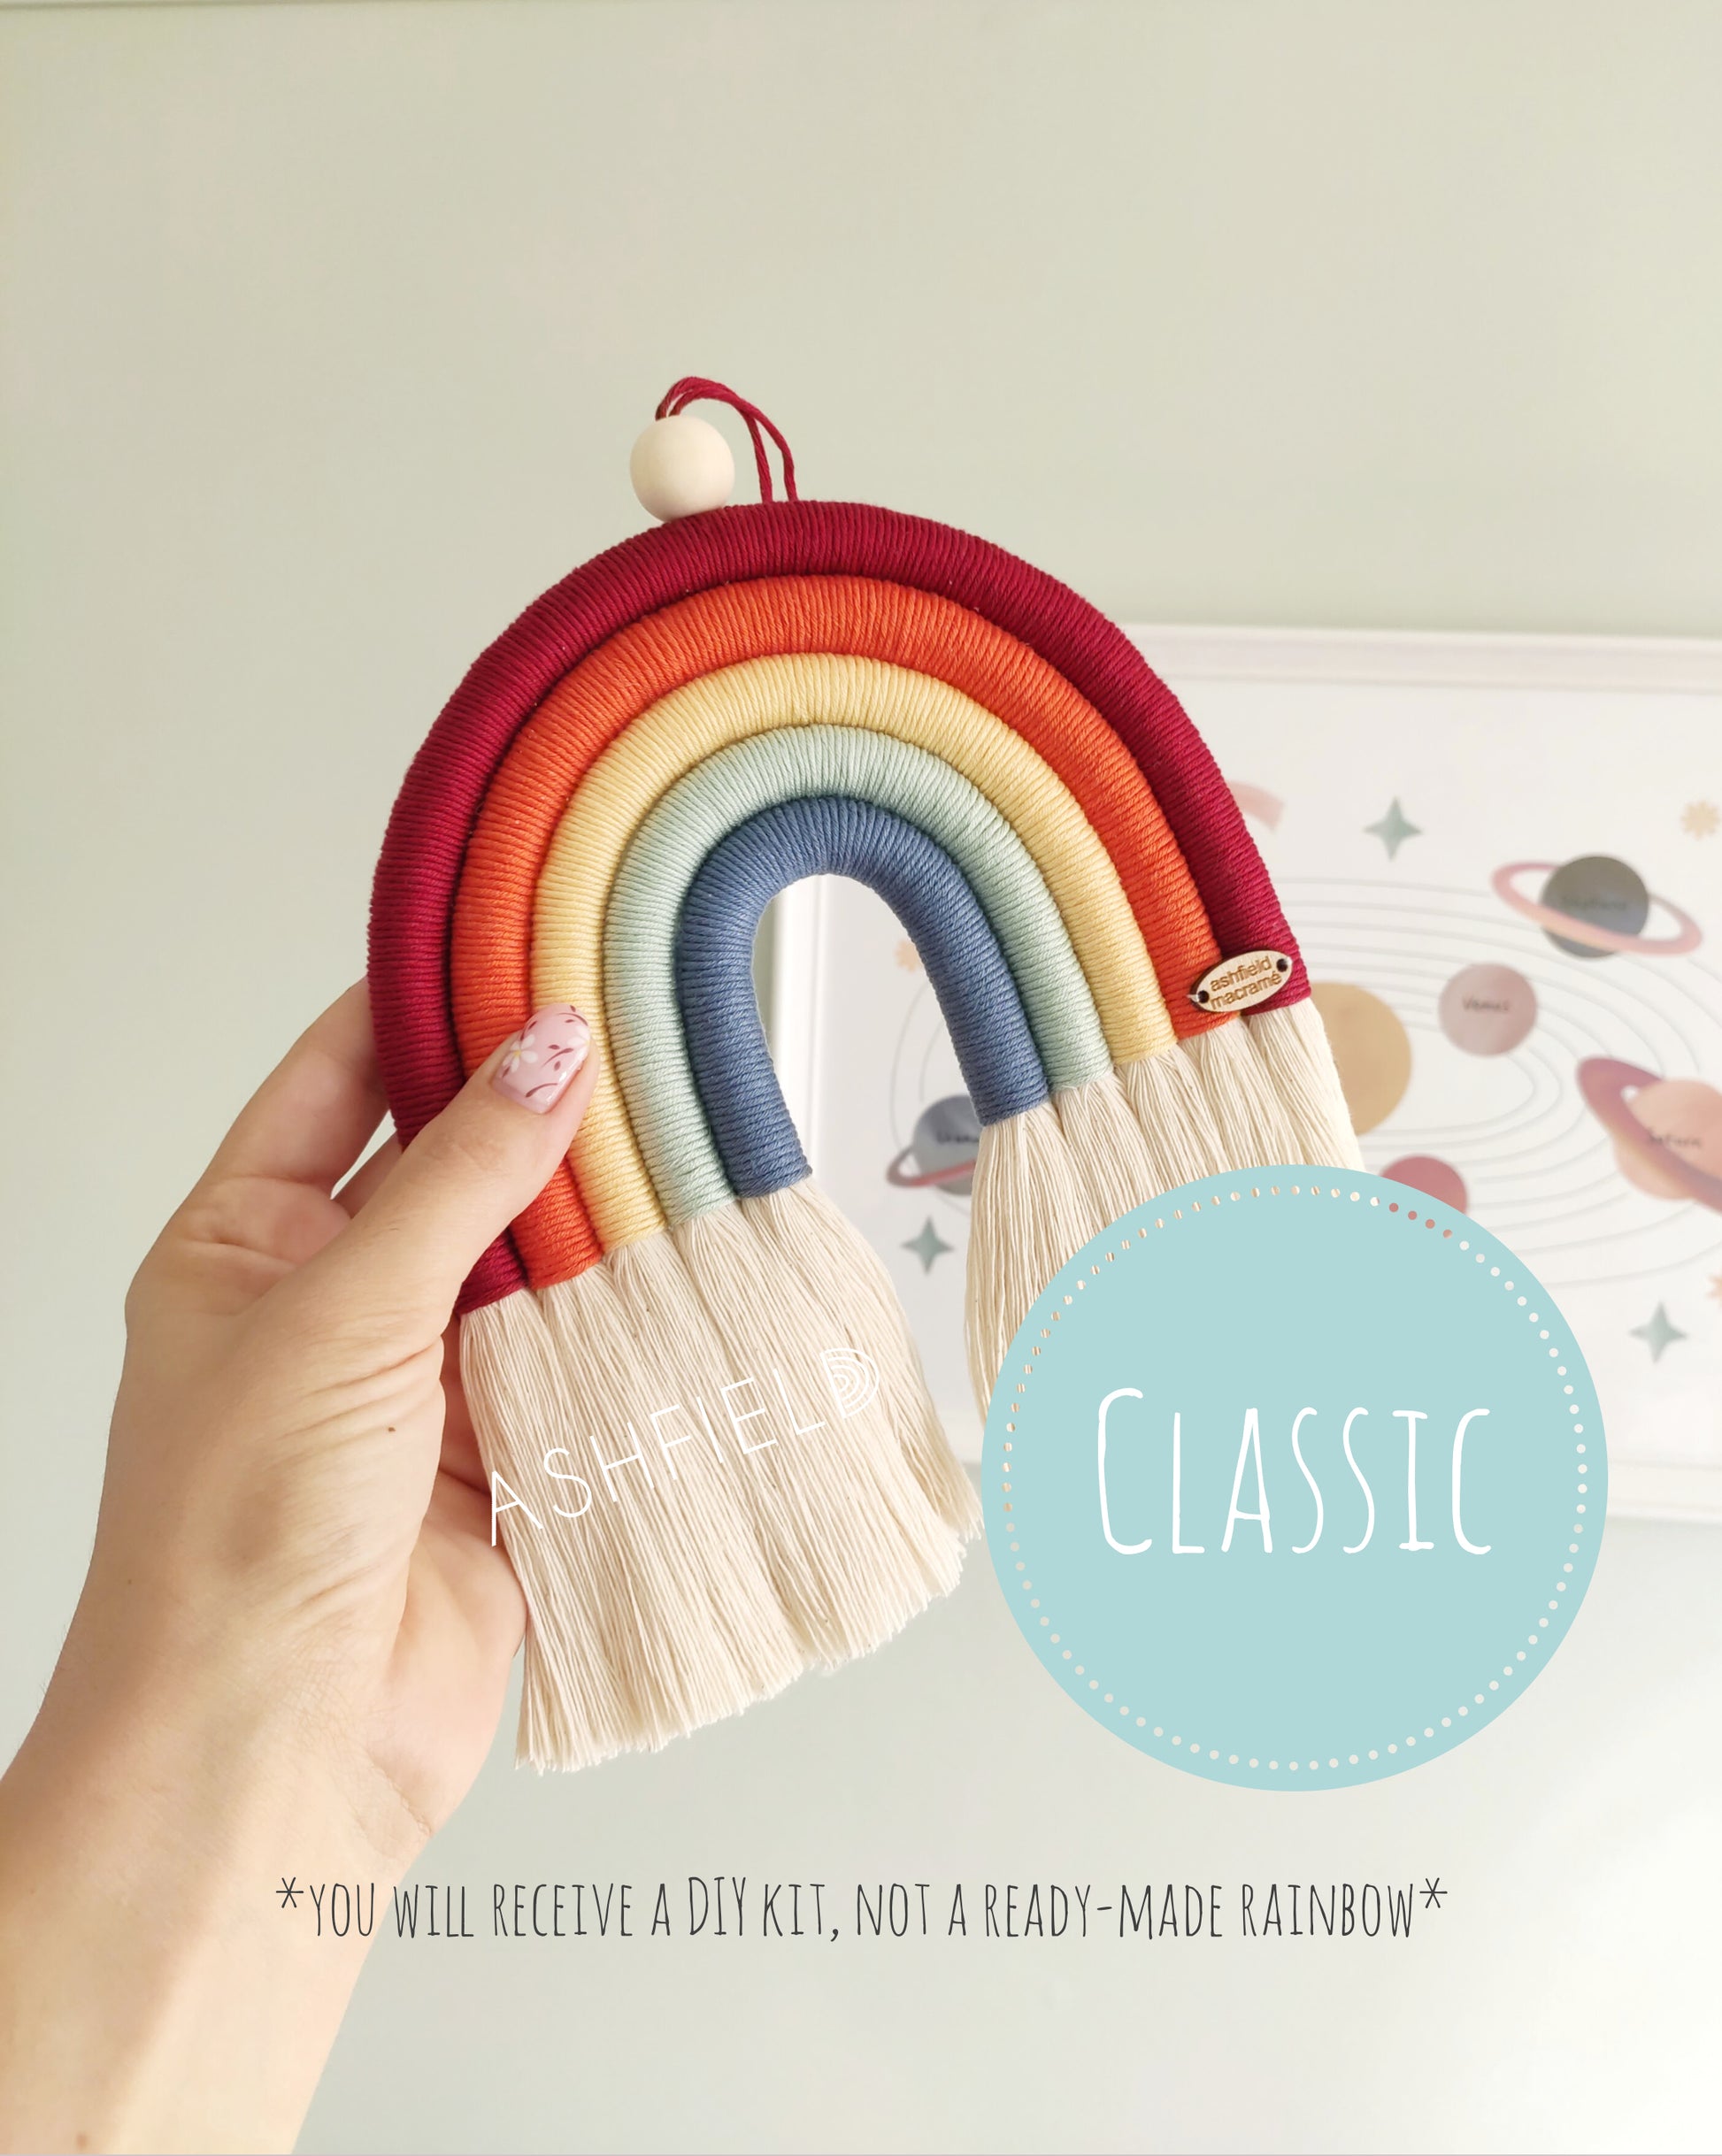 DIY Rainbow Kit four Arches, Make Your Own Rainbow, Rainbow Craft Kit,  Macrame Rainbow Kit, DIY Kit for Adults and Teens, Craft Gift 